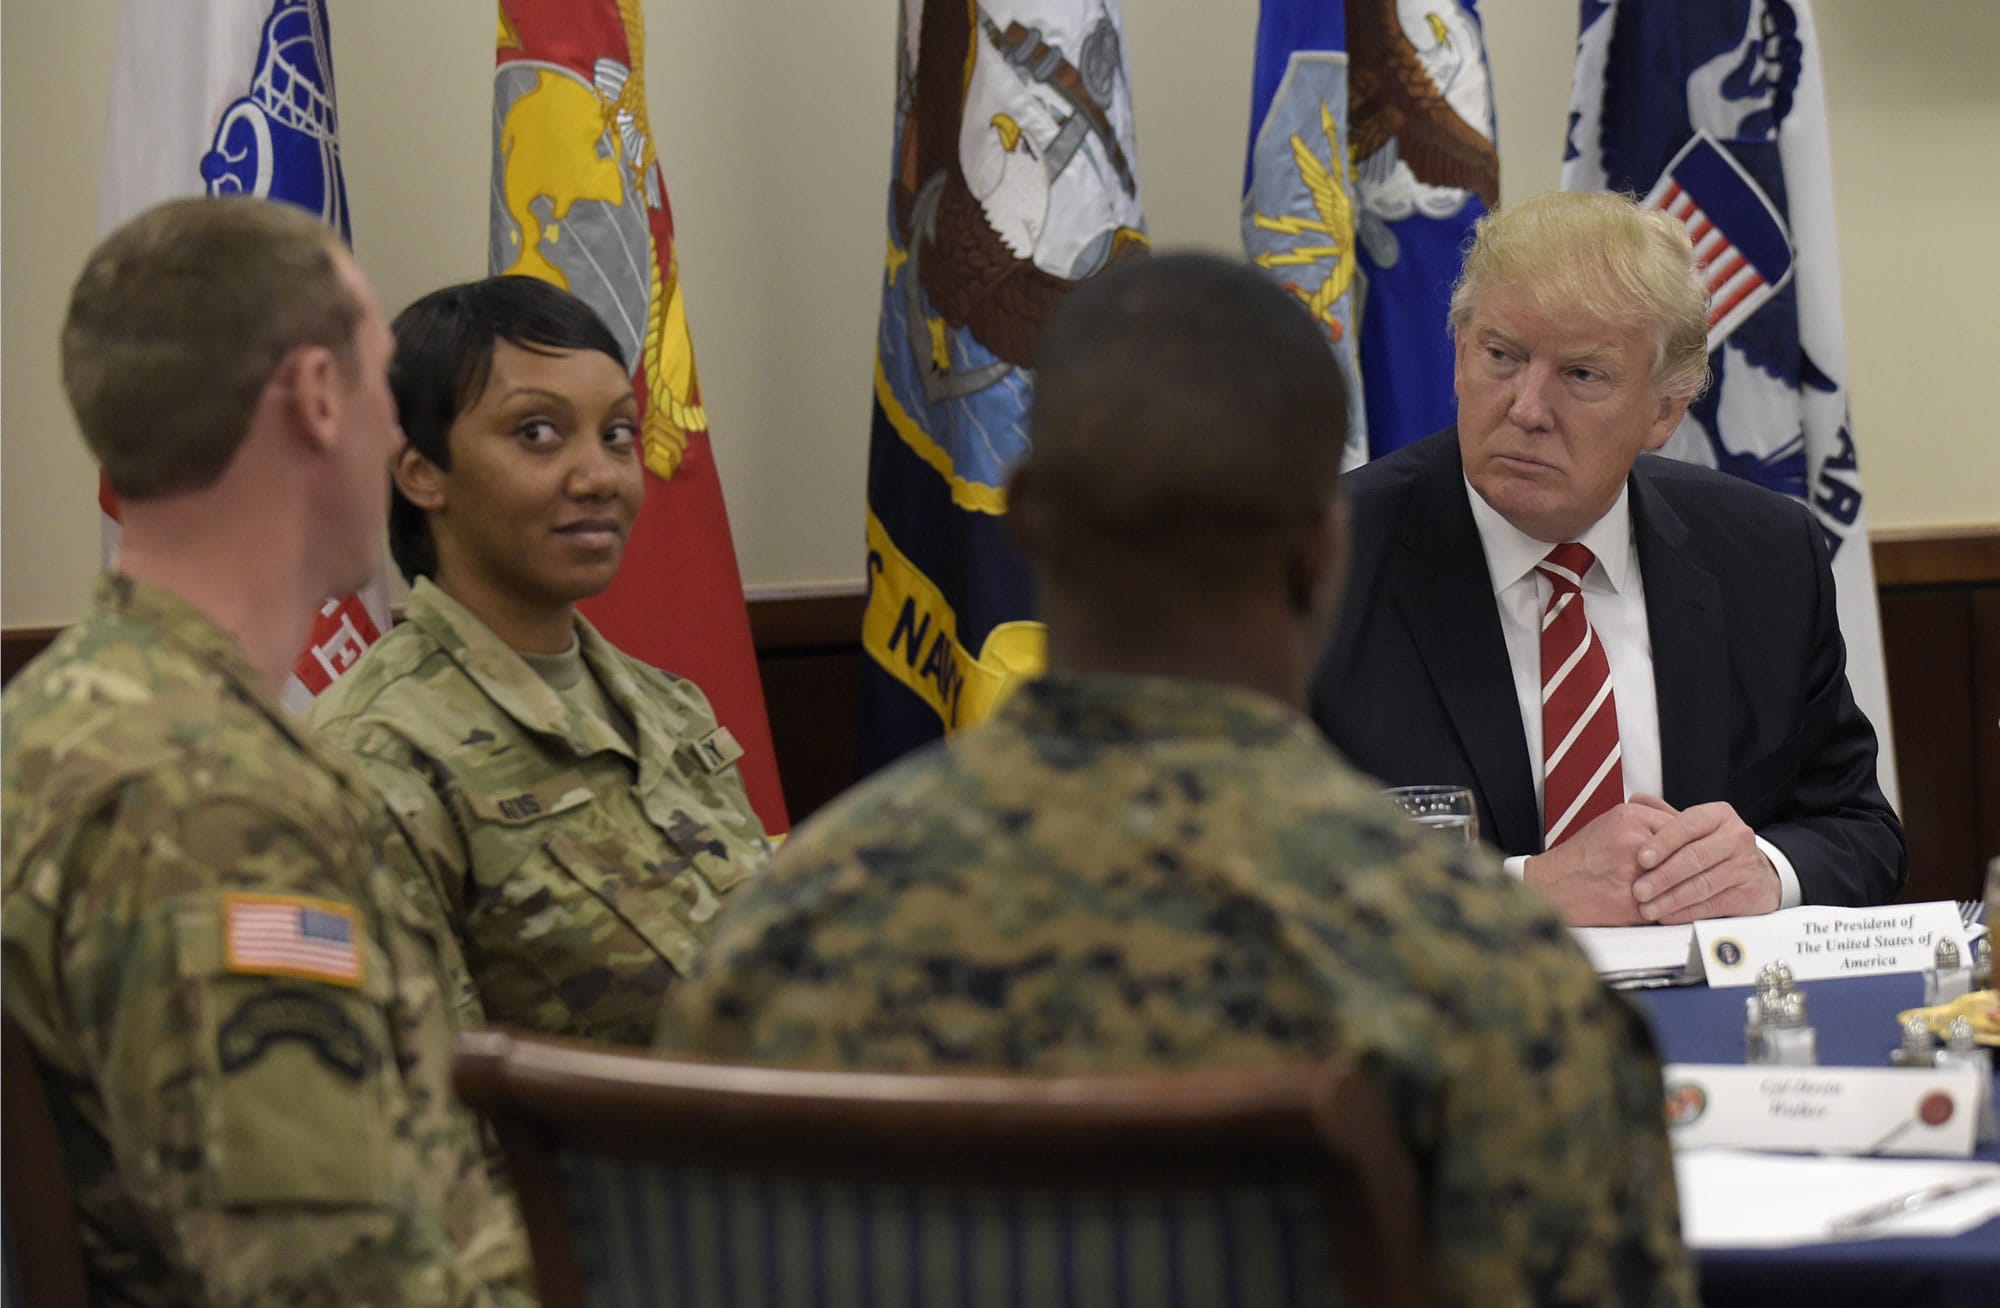 President Donald Trump has lunch with troops while visiting U.S. Central Command and U.S. Special Operations Command at MacDill Air Force Base, Fla., Monday, Feb. 6, 2017. Trump, who spent the weekend at Mar-a-Lago, stopped for a visit to the headquarters before returning to Washington.